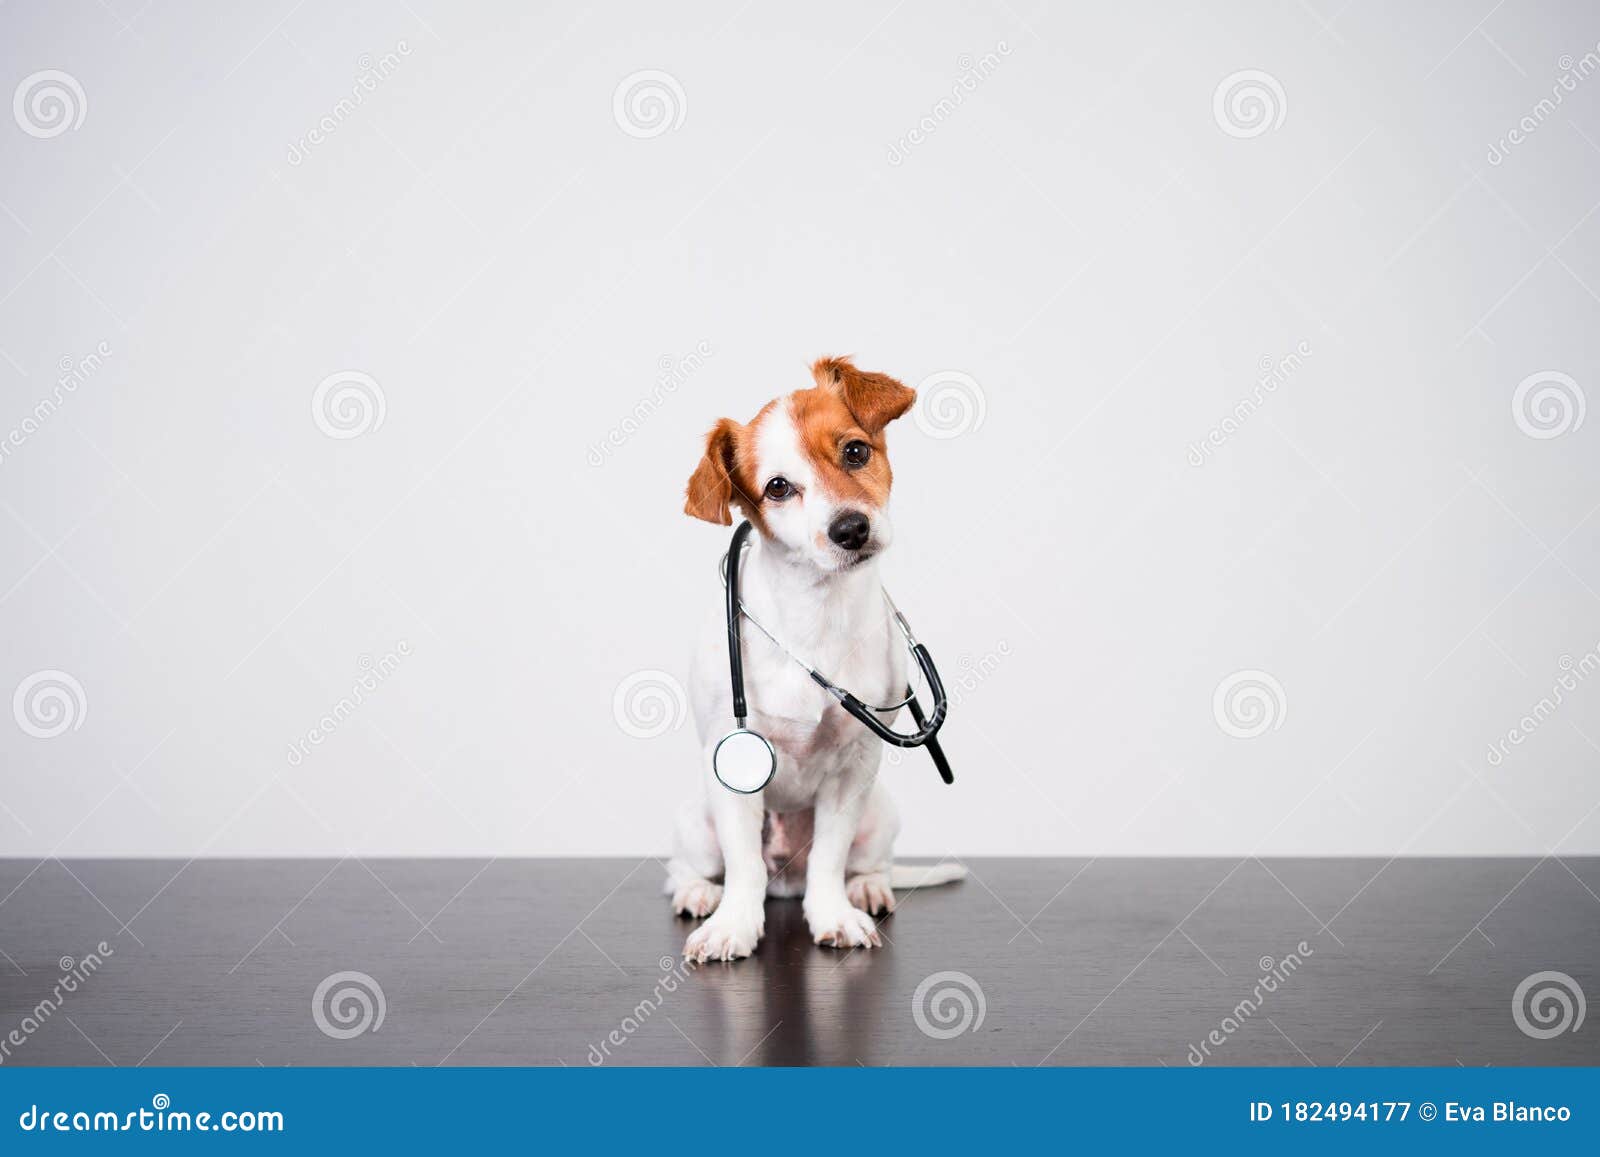 cute jack russell dog at veterinary clinic. holding a stethoscope. veterinary concept